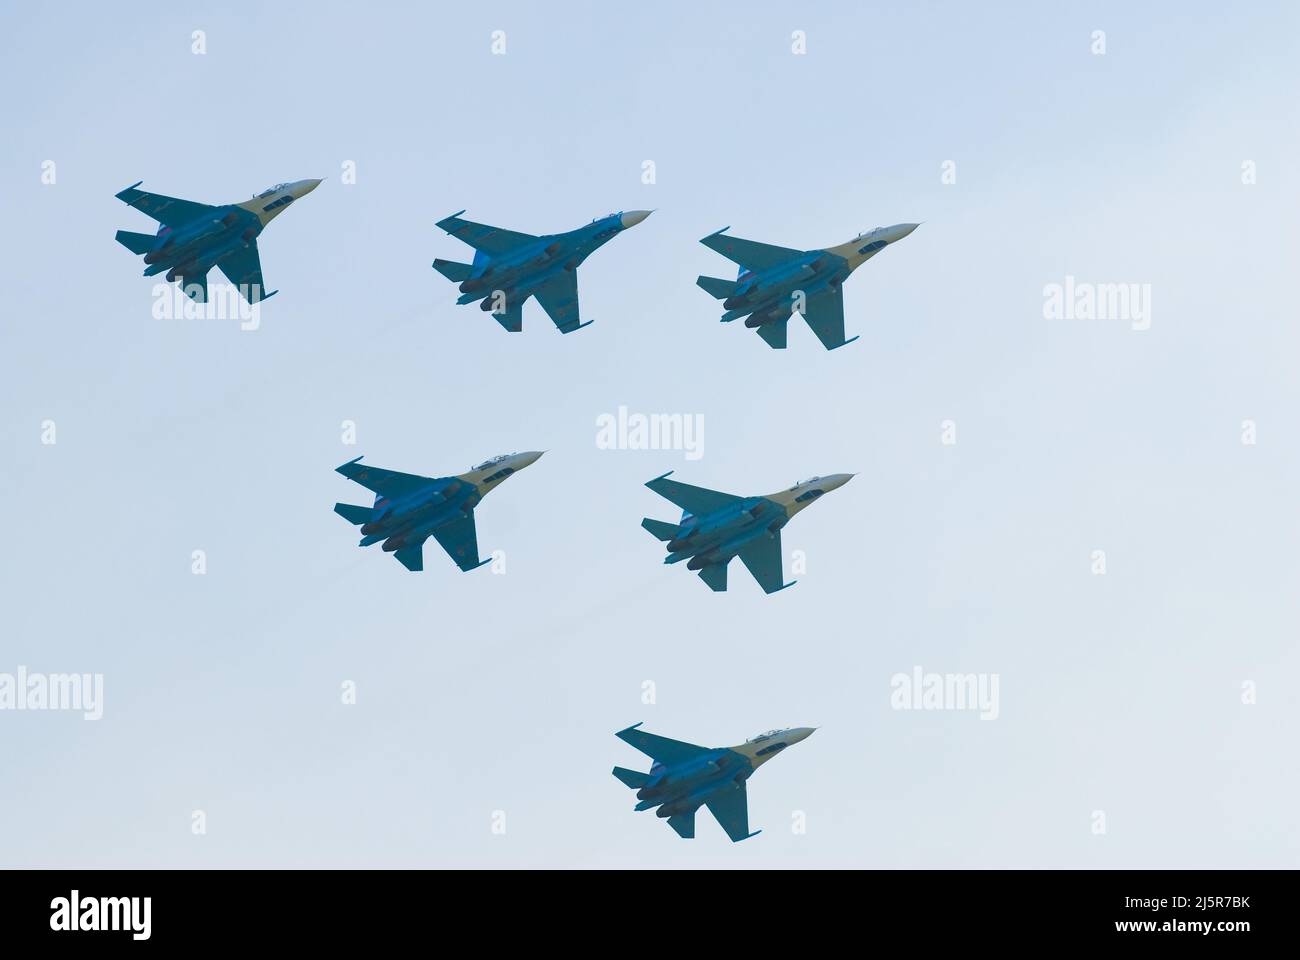 Team work of russian fighters SU-27 knights Stock Photo